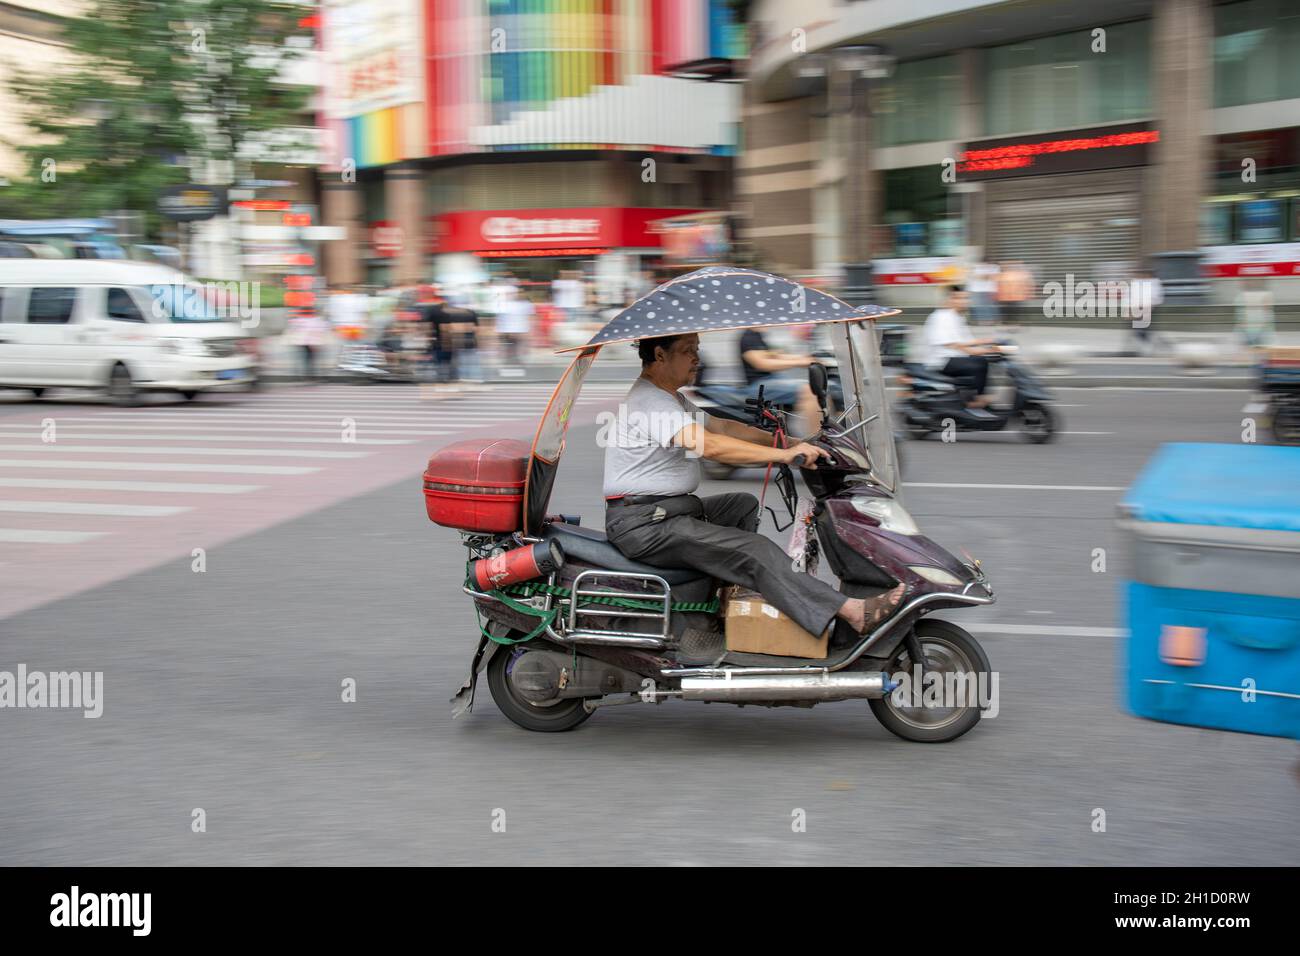 Chongqing, China - August 2019 : Man riding dangerously fast in a scooter on the congested street Stock Photo